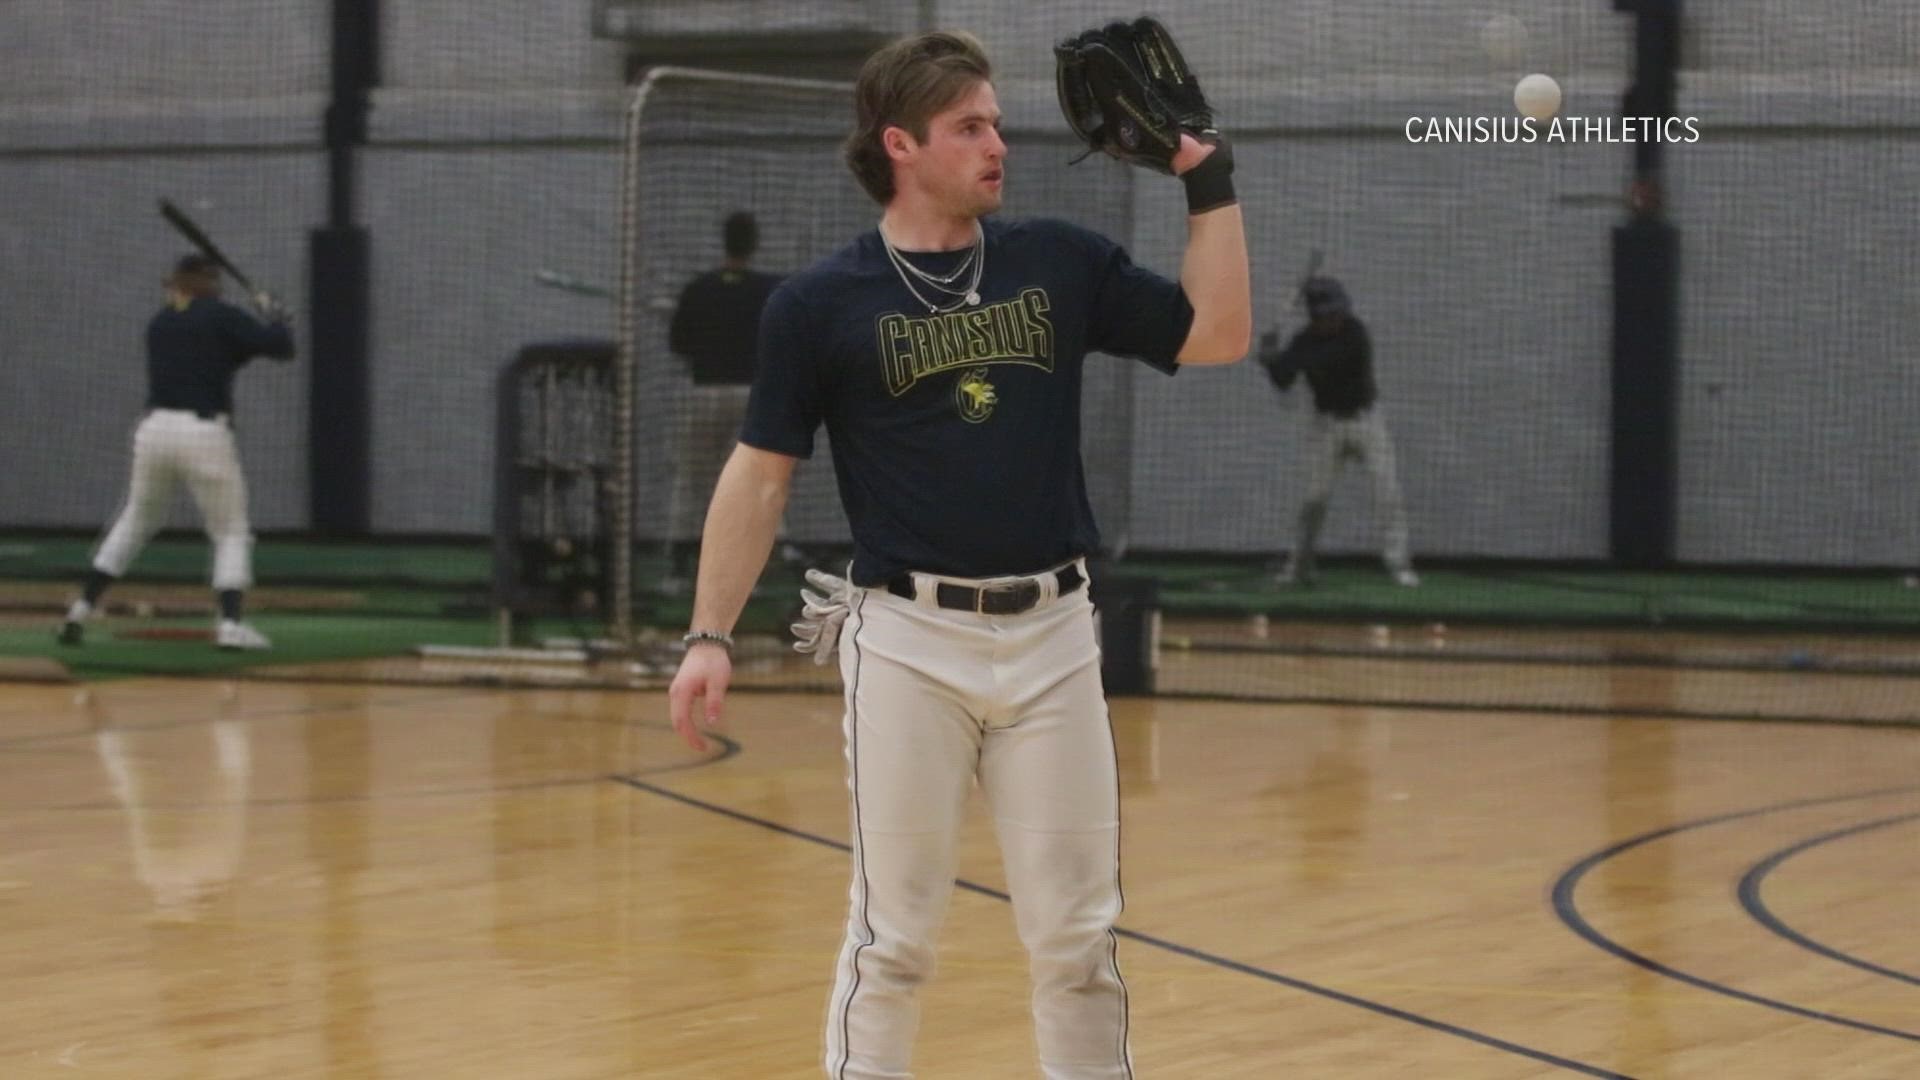 Canisius made it to the NCAA tournament last season for the first time since 2018, led by the hot bat from Grant, who was named to the preseason All-American list.